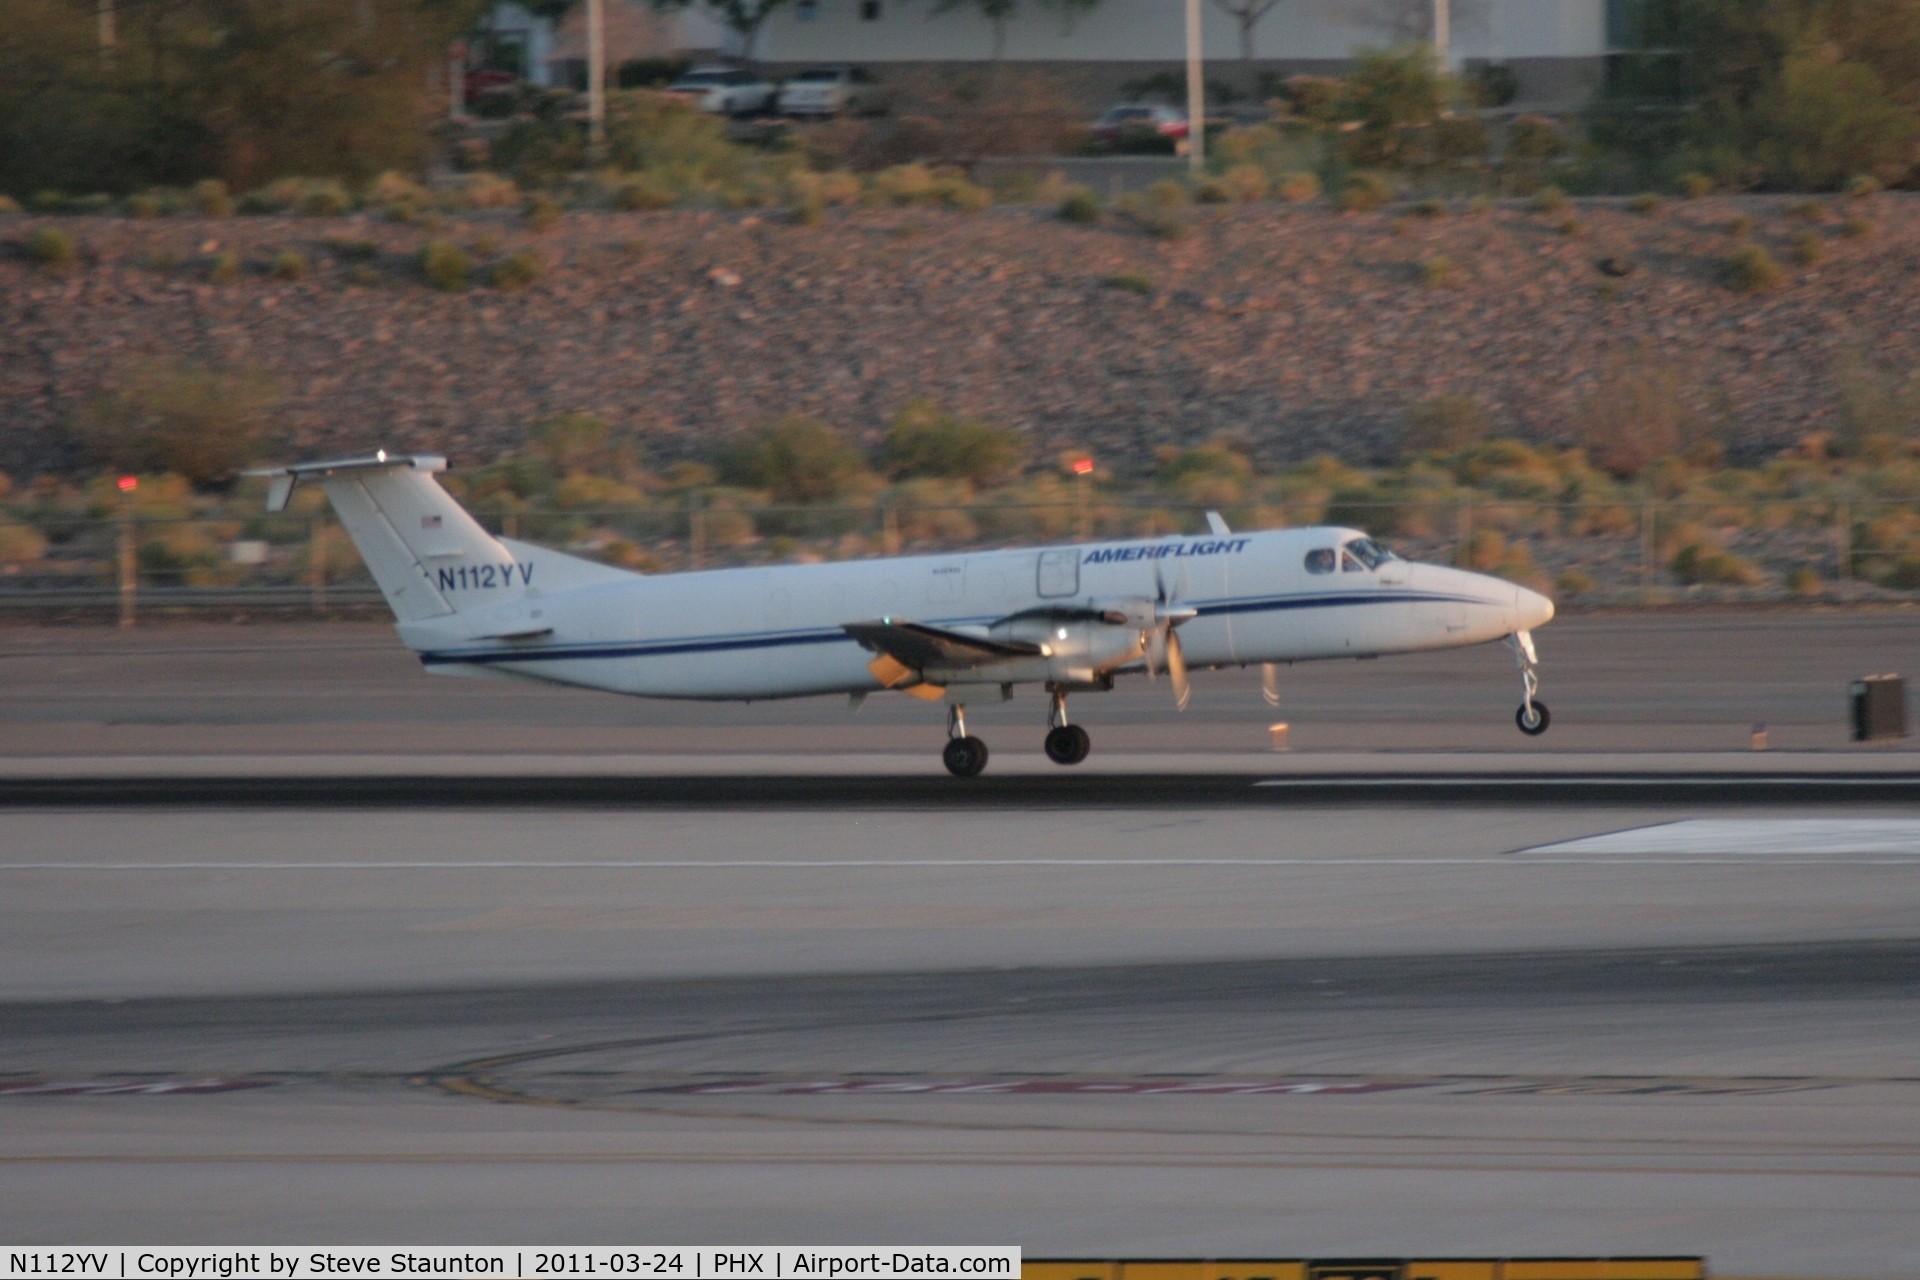 N112YV, 1990 Beech 1900C C/N UC112, Taken at Phoenix Sky Harbor Airport, in March 2011 whilst on an Aeroprint Aviation tour